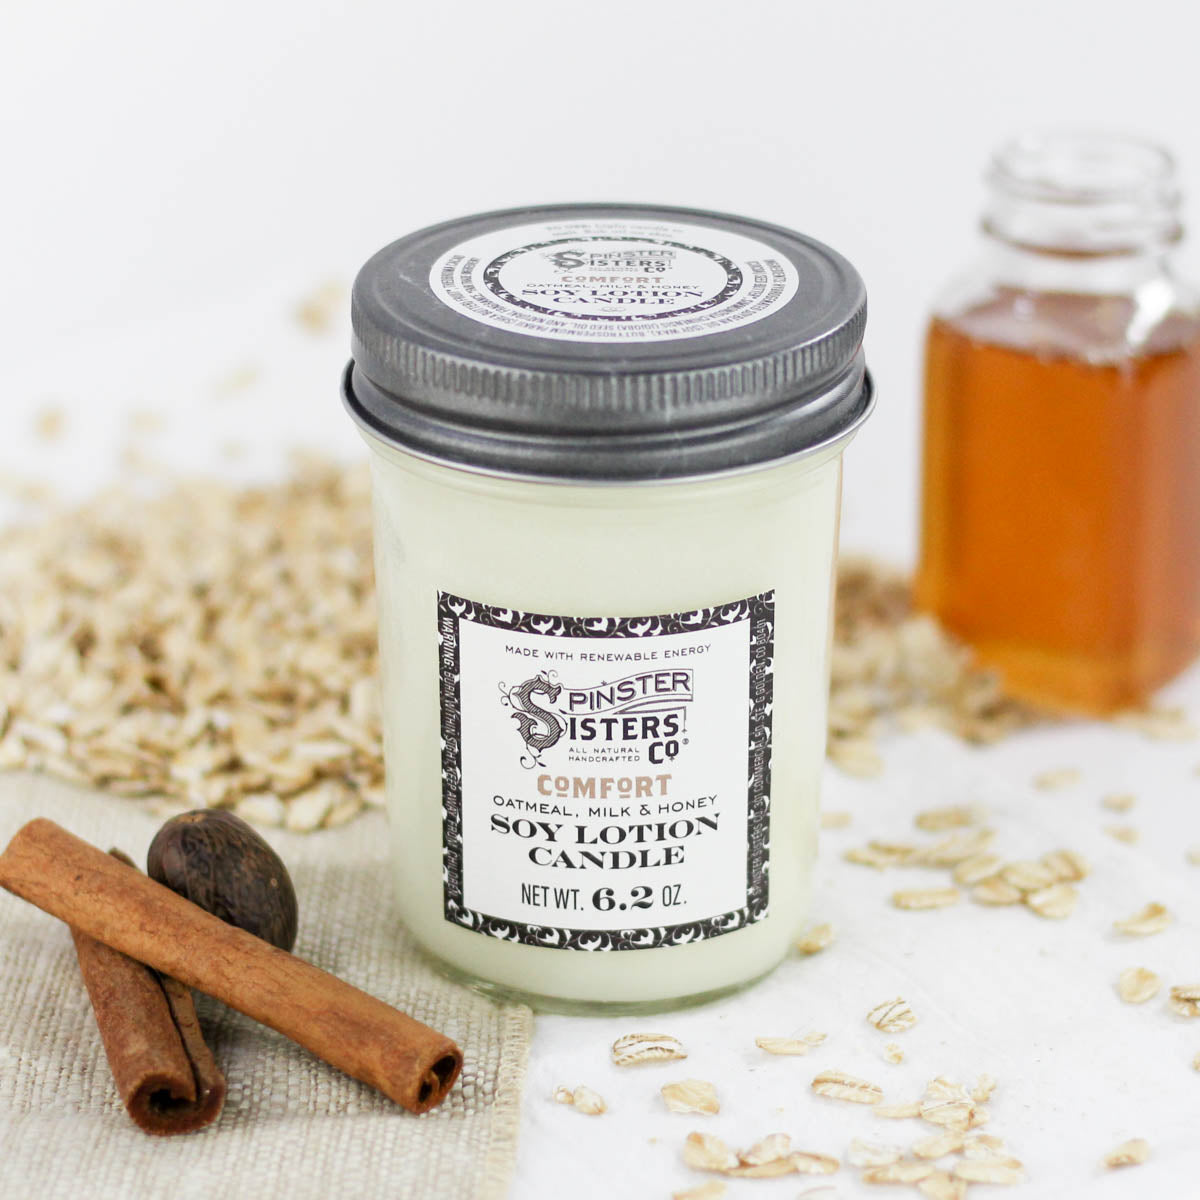 Oatmeal, Milk & Honey candle in a jar surrounded by its ingredients